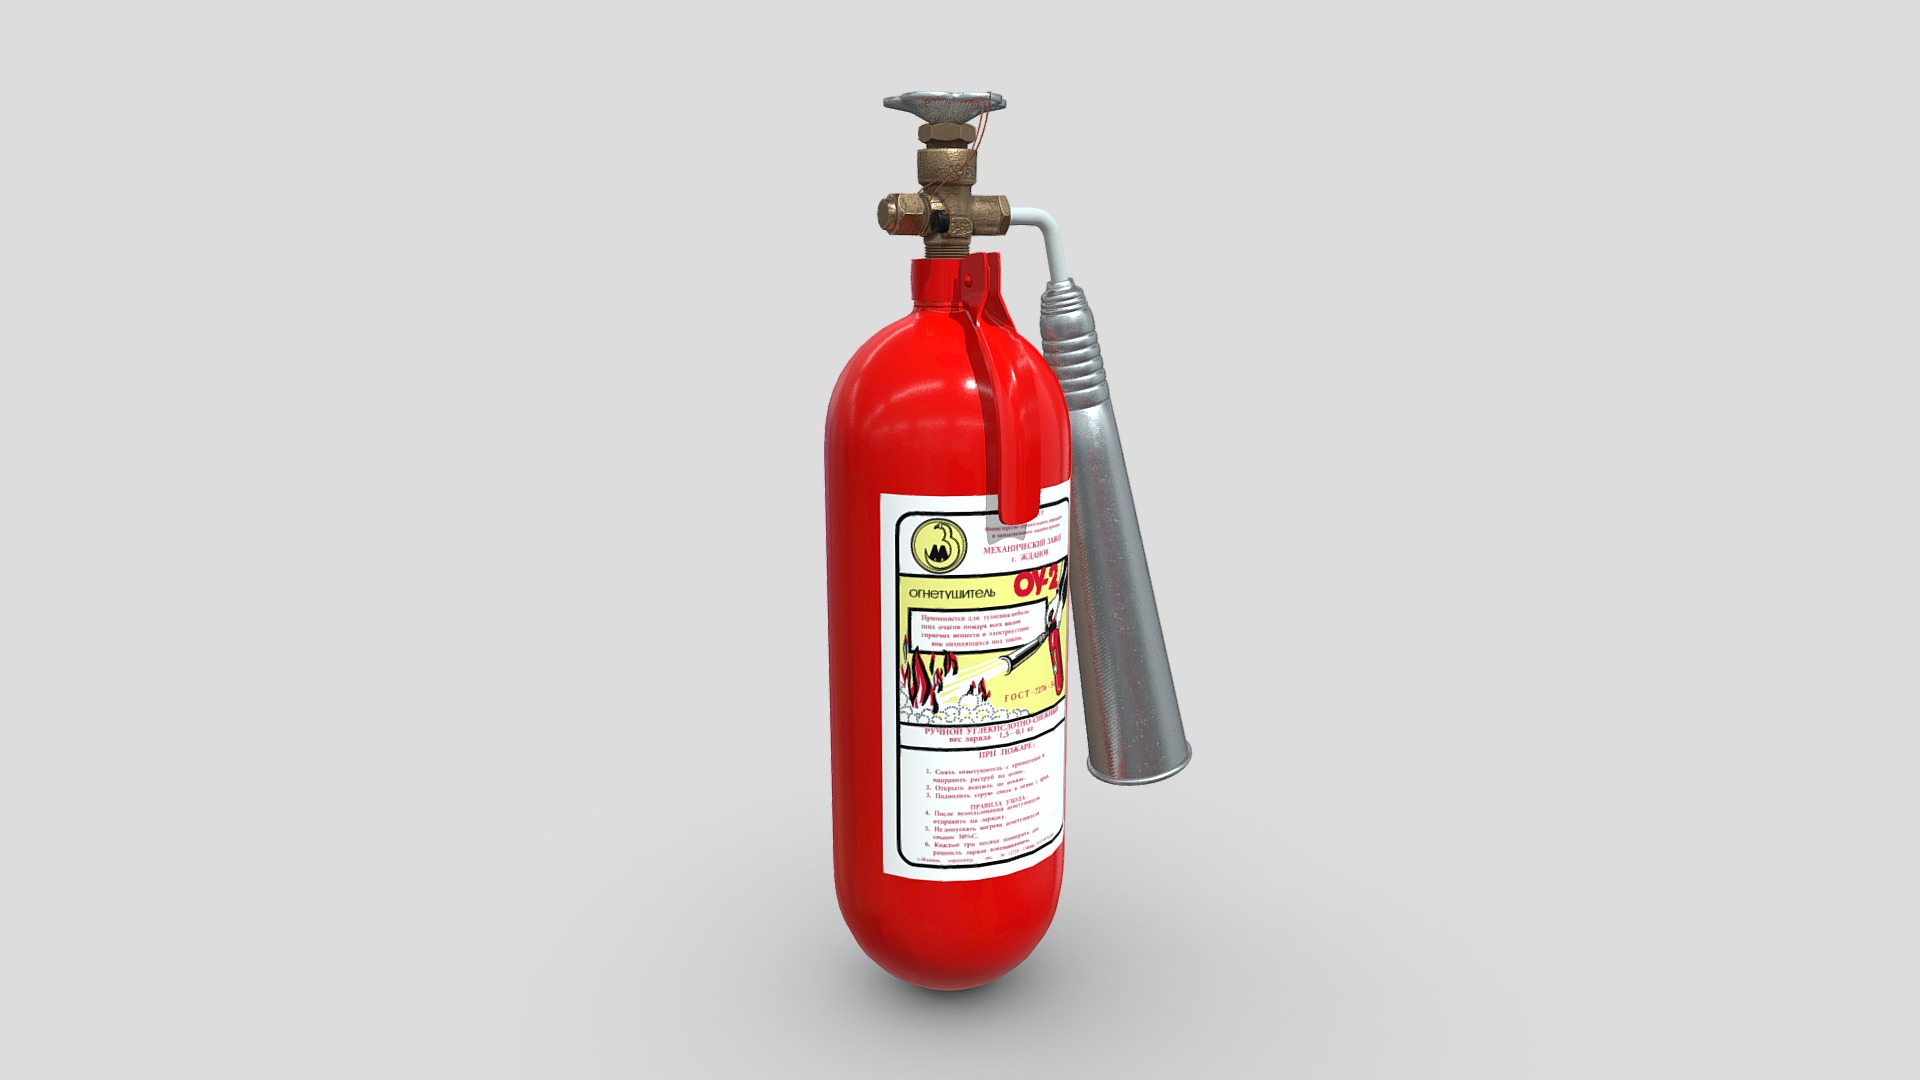 3D model Огнетушитель ОУ-2 / Fire Extinguisher ОУ-2 - This is a 3D model of the Огнетушитель ОУ-2 / Fire Extinguisher ОУ-2. The 3D model is about a red fire extinguisher.